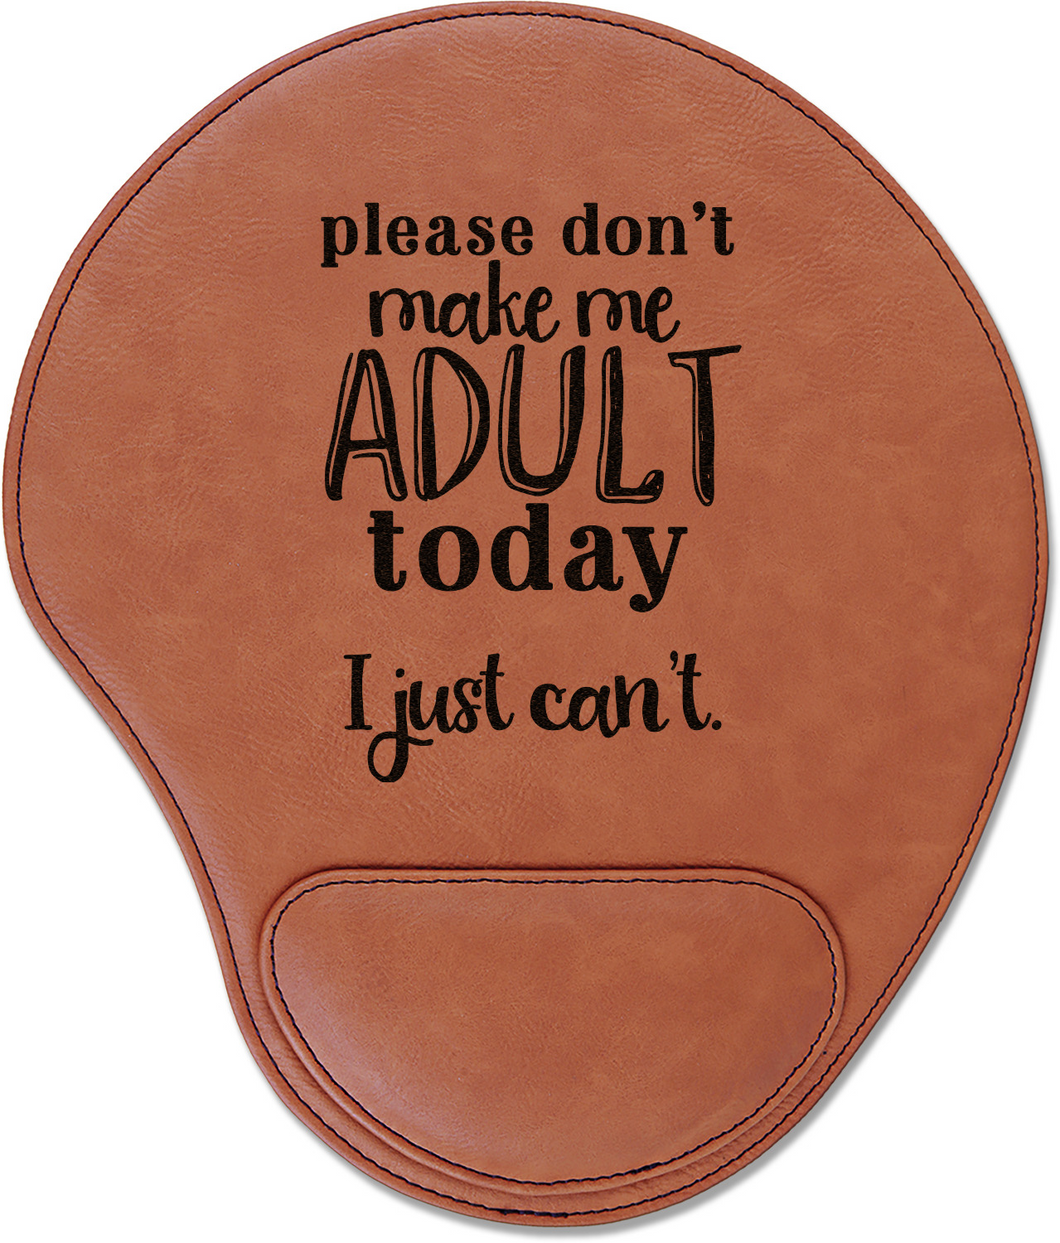 Please don't make me Adult today I just can't - engraved Leather Mouse Pad